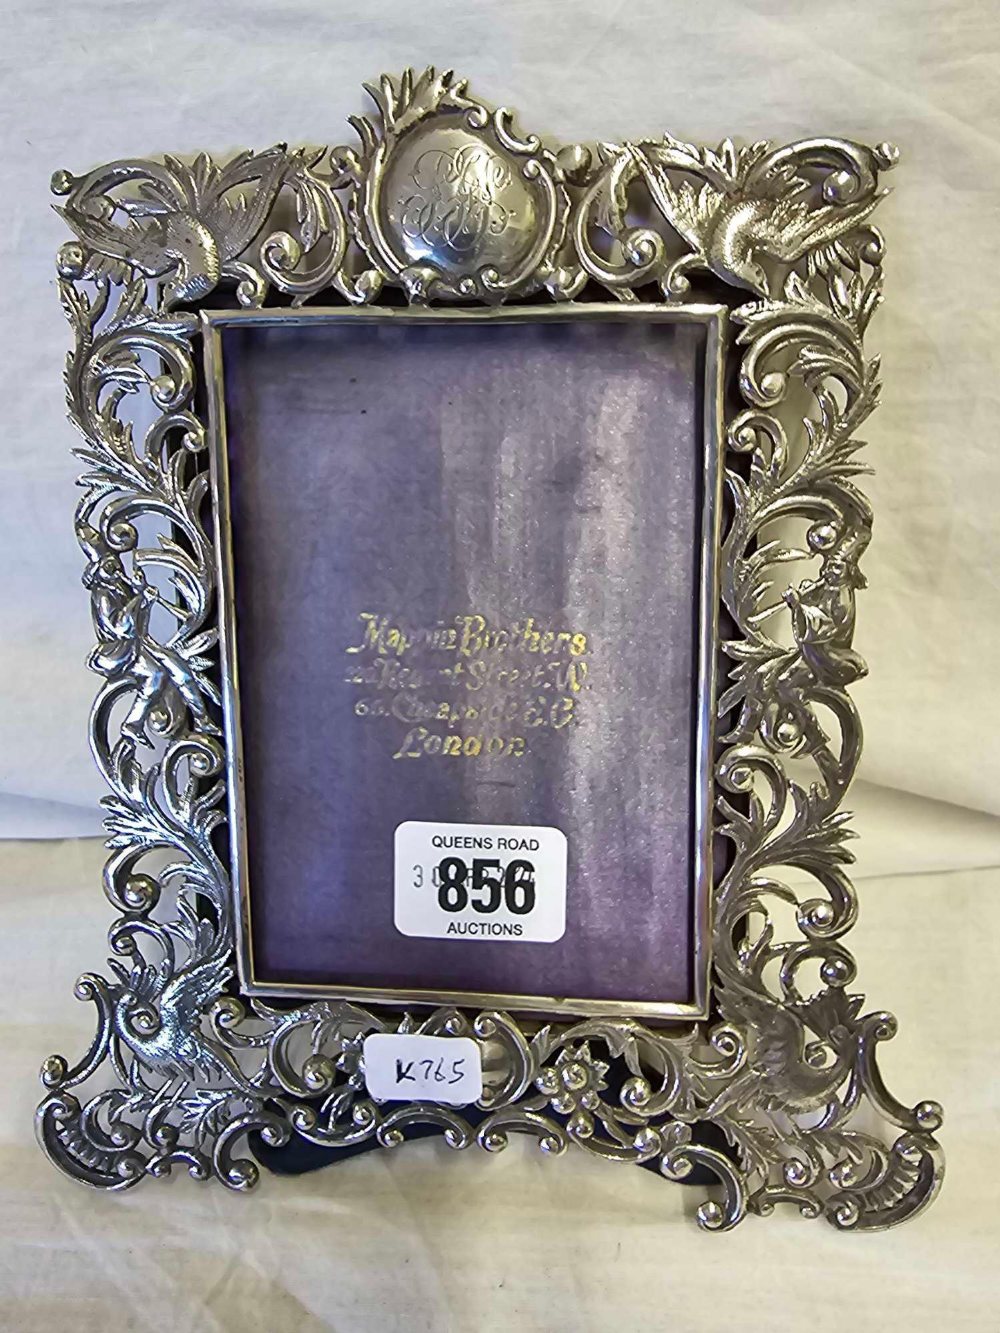 ORNATE PIERCED SILVER PICTURE FRAME BY MAPPIN BROS LONDON 1898,